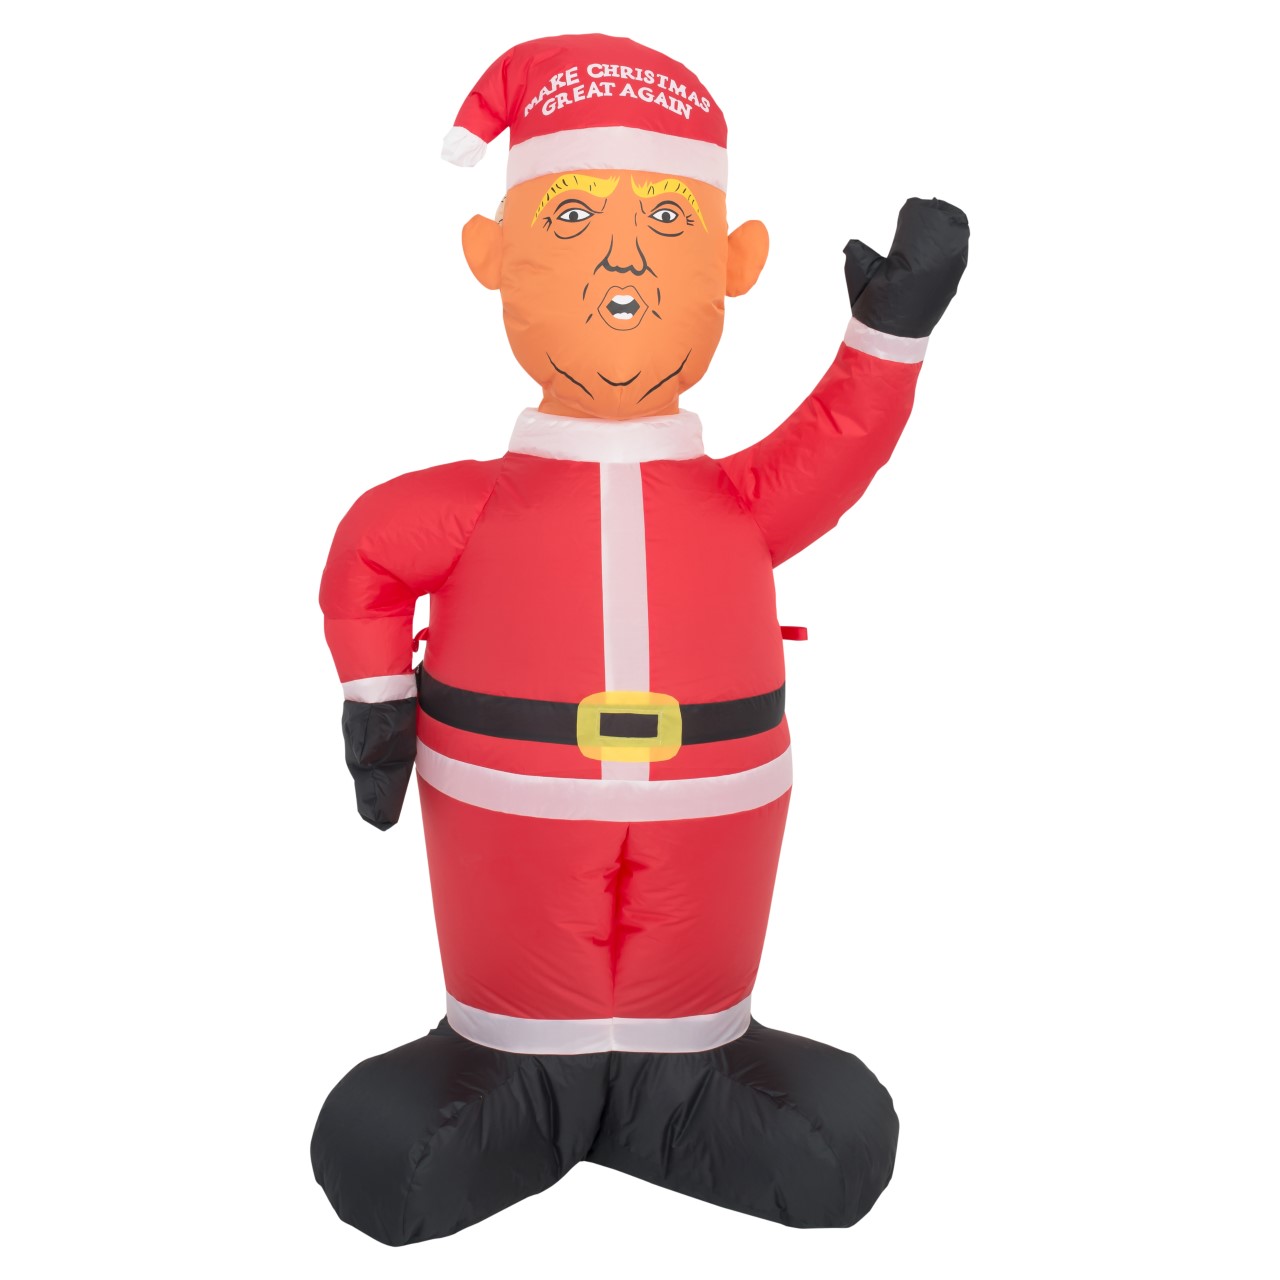 Donald Trump Make Christmas Great Again Lawn Inflatable [InflatableTrump]